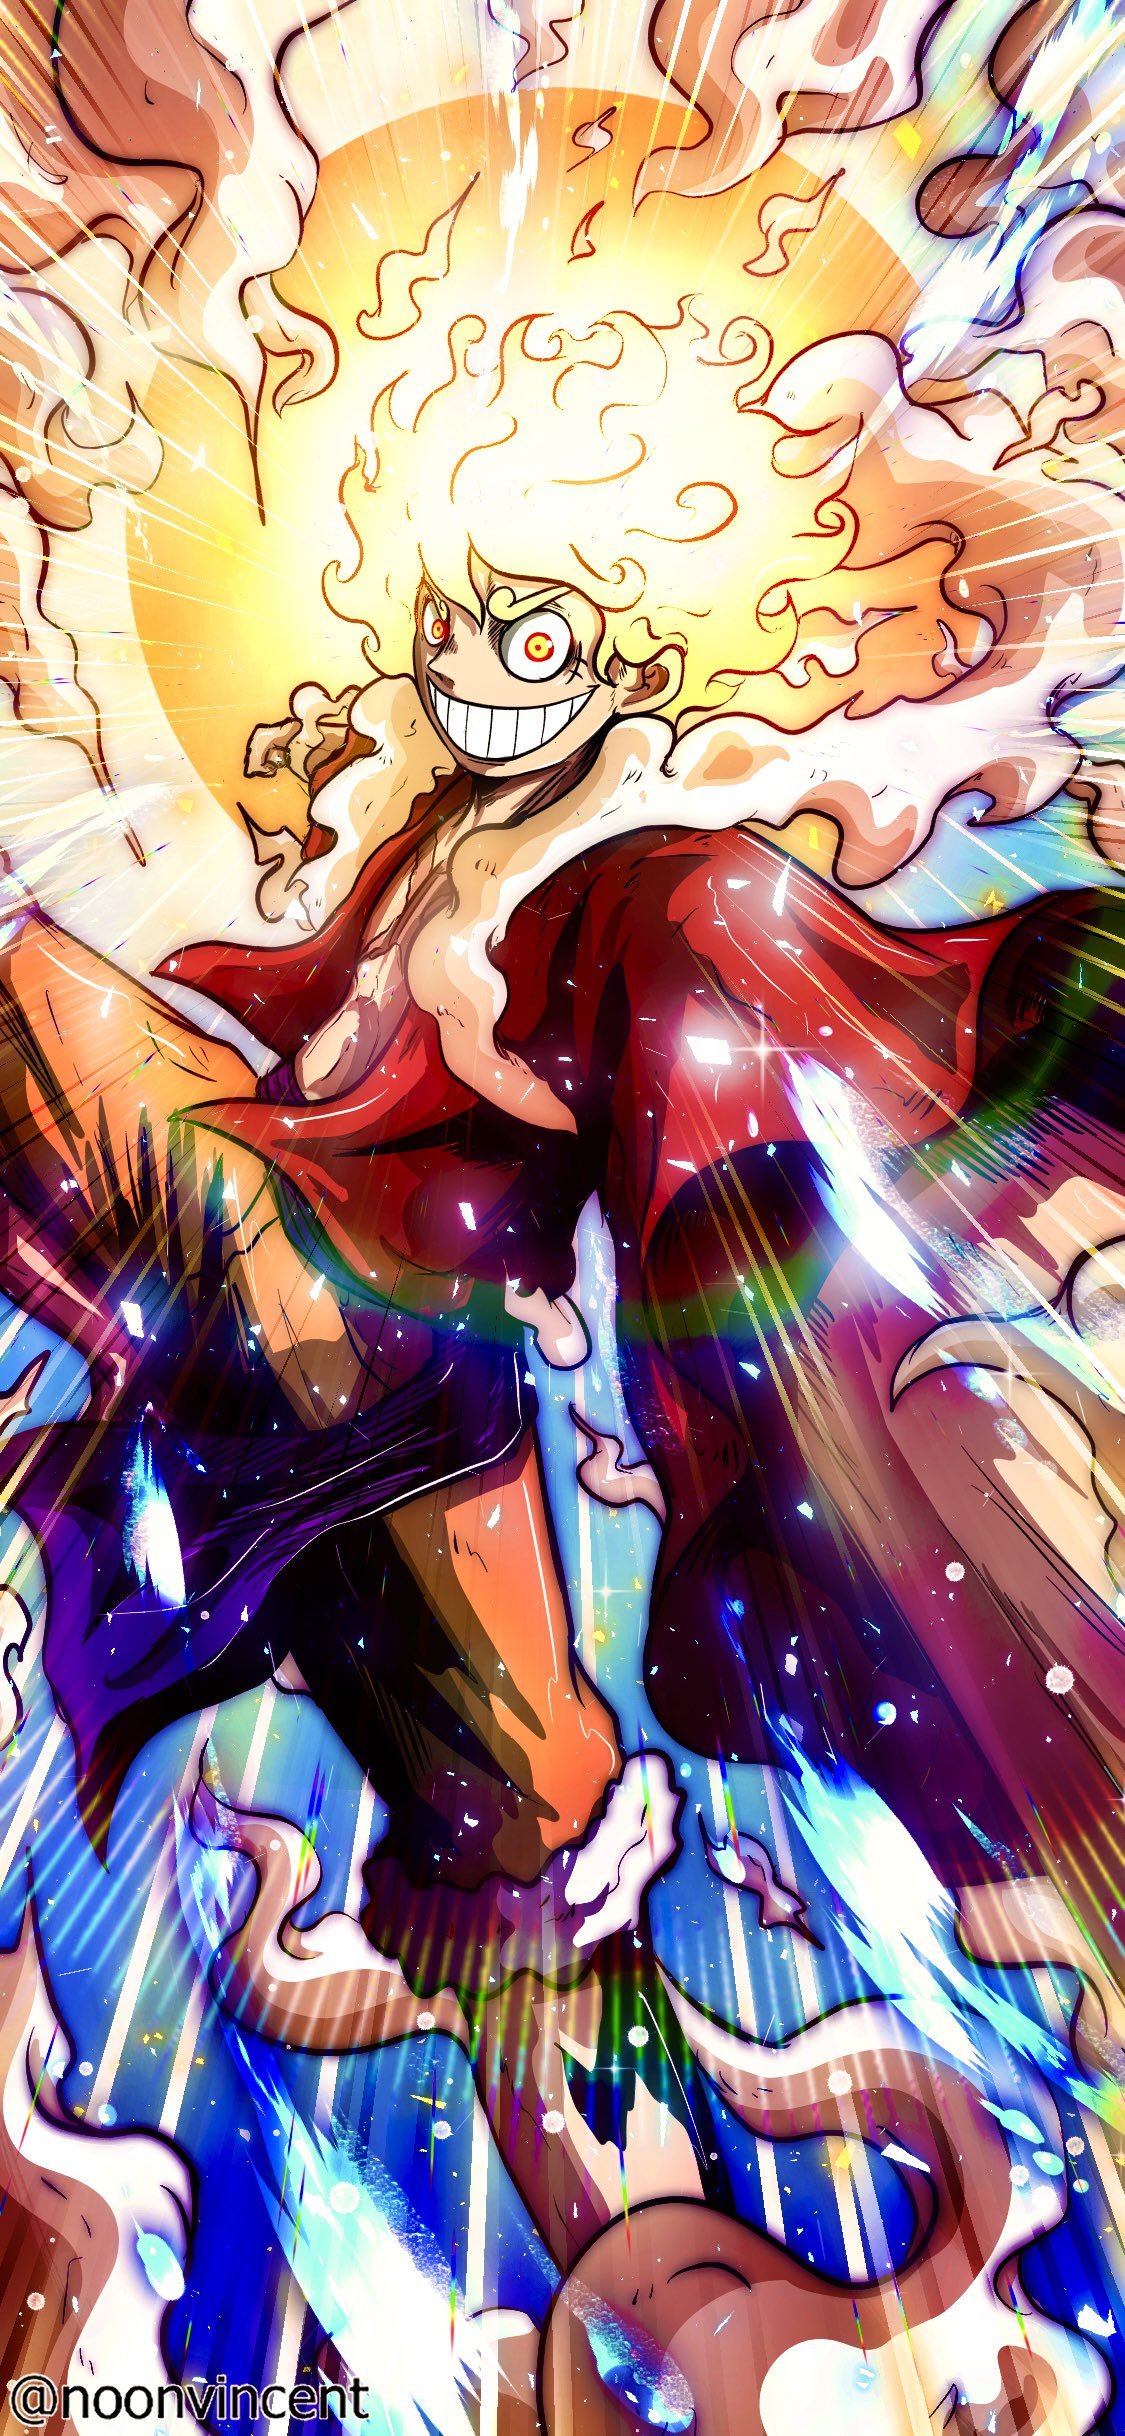 Luffy Gear 5 fan art that is really worth checking out